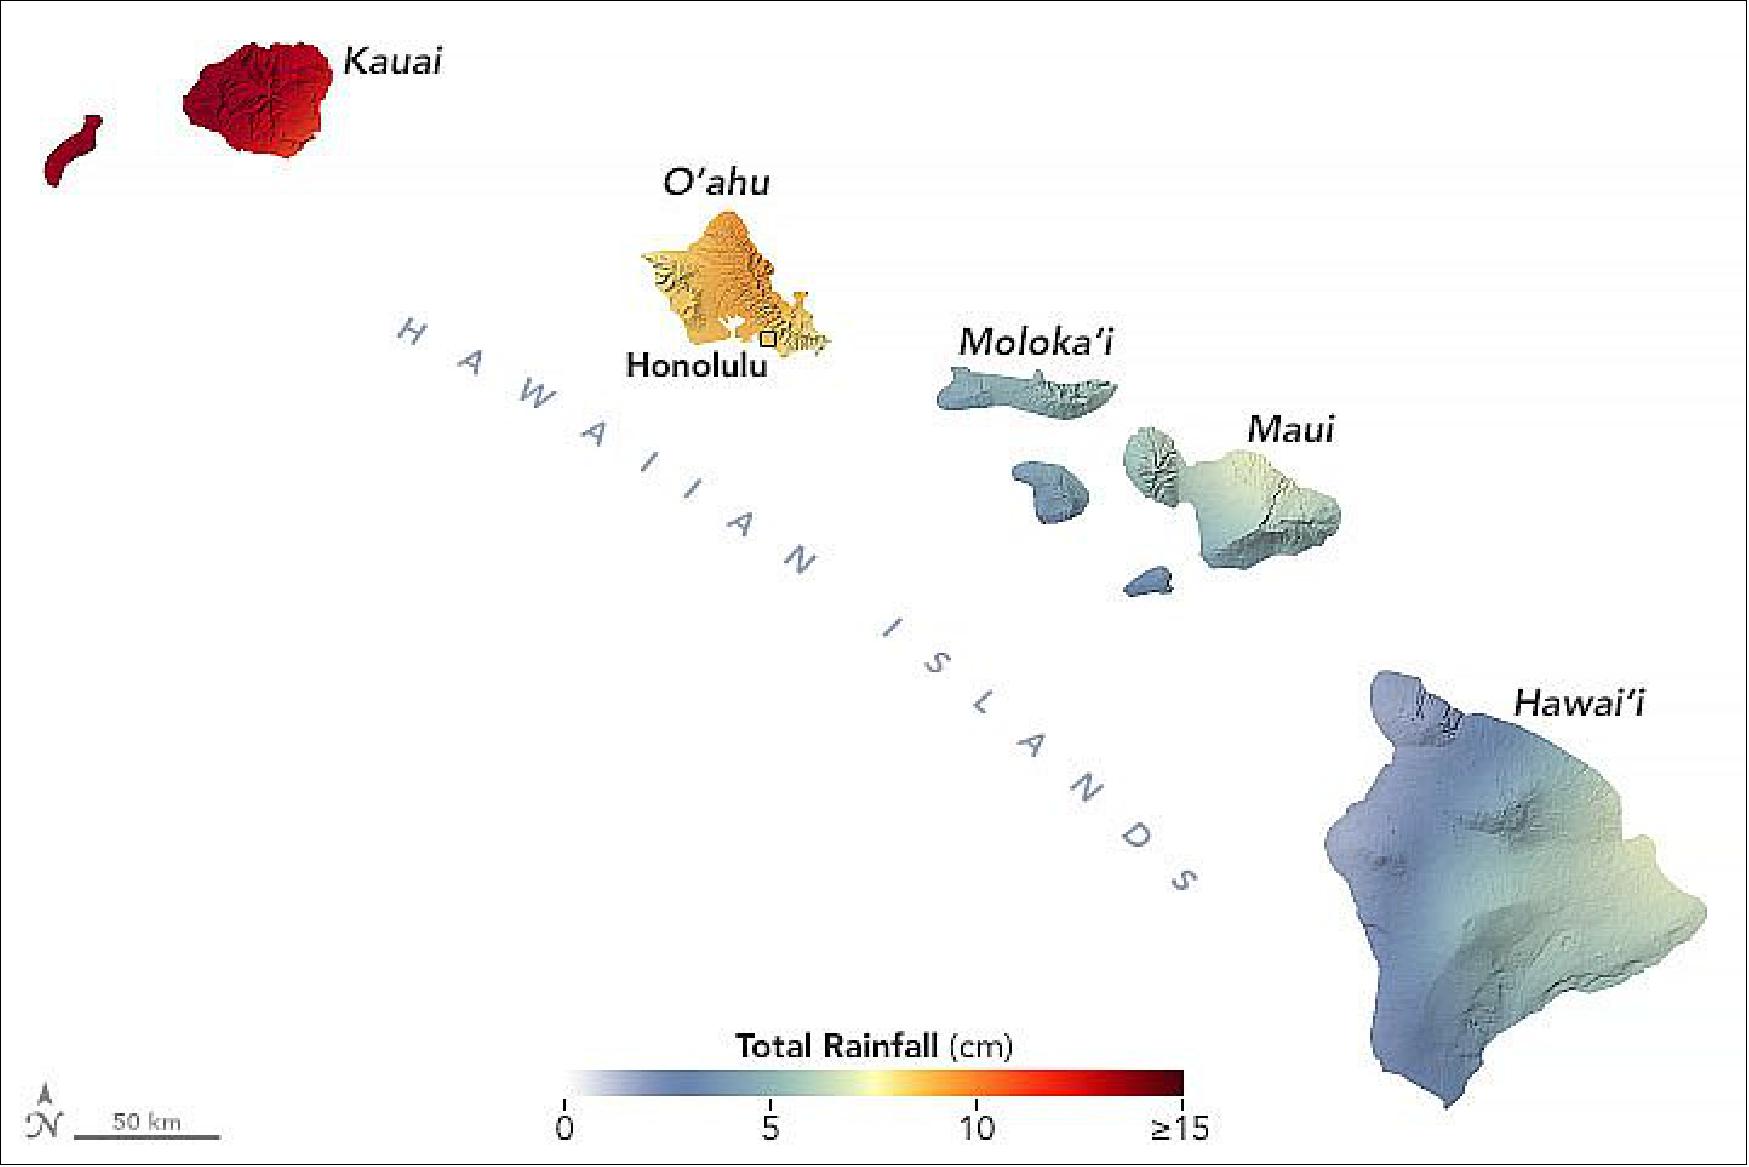 Figure 20: Flash floods, landslides, and power outages plagued the islands after torrential rains fell. This map shows the rainfall accumulation across the region from March 5 to 12, 2021. The data are remotely-sensed estimates that come from the Integrated Multi-Satellite Retrievals for GPM (IMERG), a product of the Global Precipitation Measurement (GPM) mission. The darkest oranges and reds indicate places where GPM detected rainfall totals exceeding 4 inches (10 cm) during this period. Due to averaging of the satellite data, local rainfall amounts may be significantly higher when measured from the ground. The National Weather Service reported rainfall totals in several towns that topped 10 inches (25 cm) over a 72-hour period [image credit: NASA Earth Observatory image by Joshua Stevens, using IMERG data from the Global Precipitation Mission (GPM) at NASA/GSFC, and topographic data from the Shuttle Radar Topography Mission (SRTM). Story by Adam Voiland]